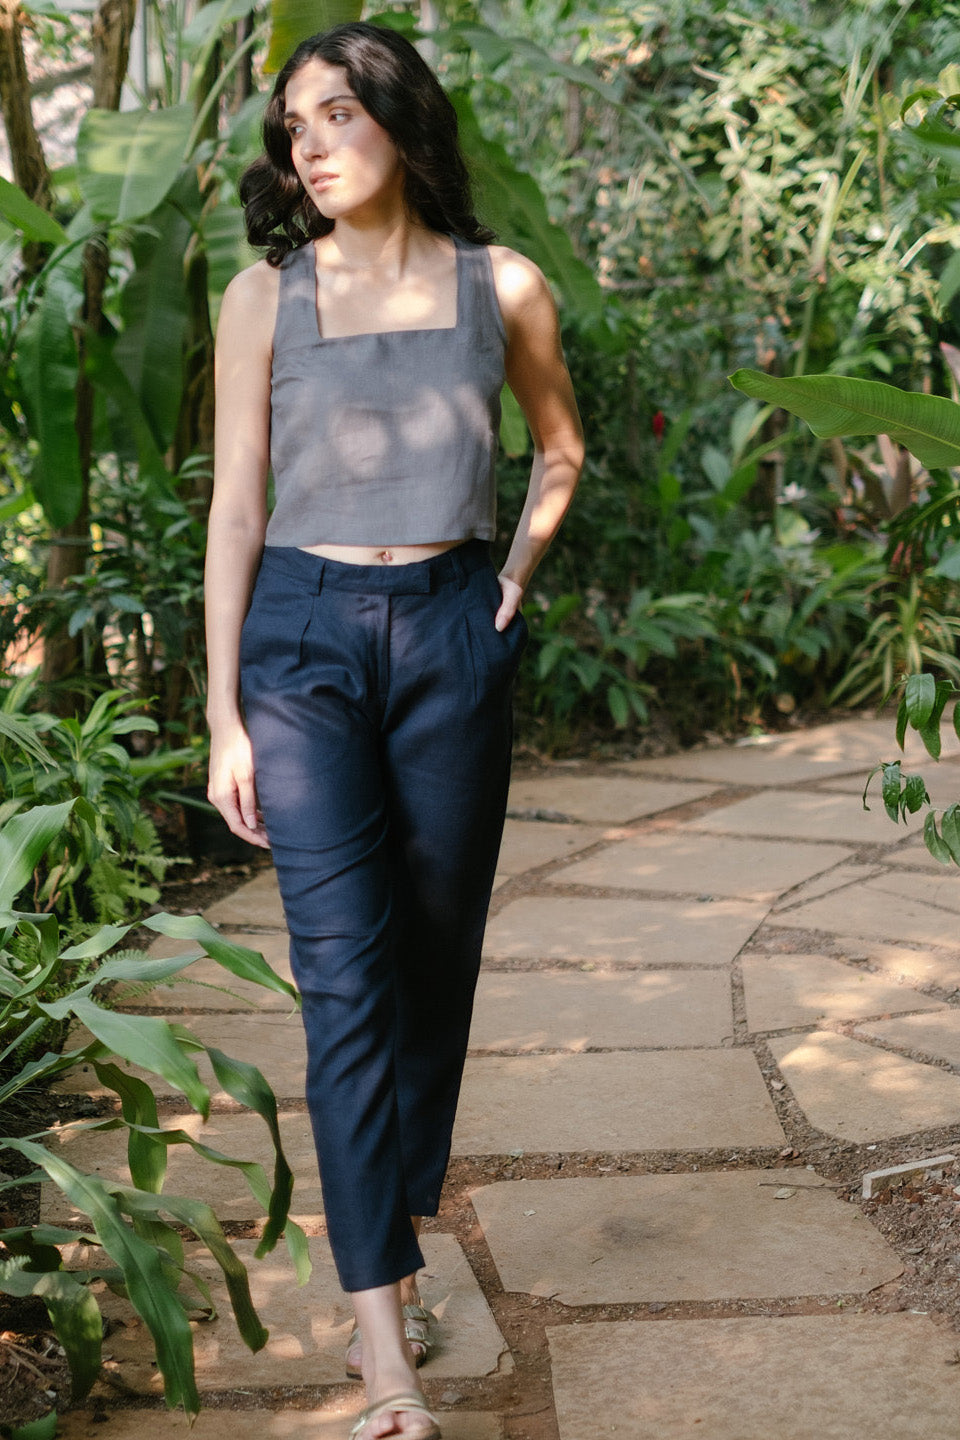 Trousers for Women - The Linen Pleated Trousers for Women Indigo | Creatures of Habit